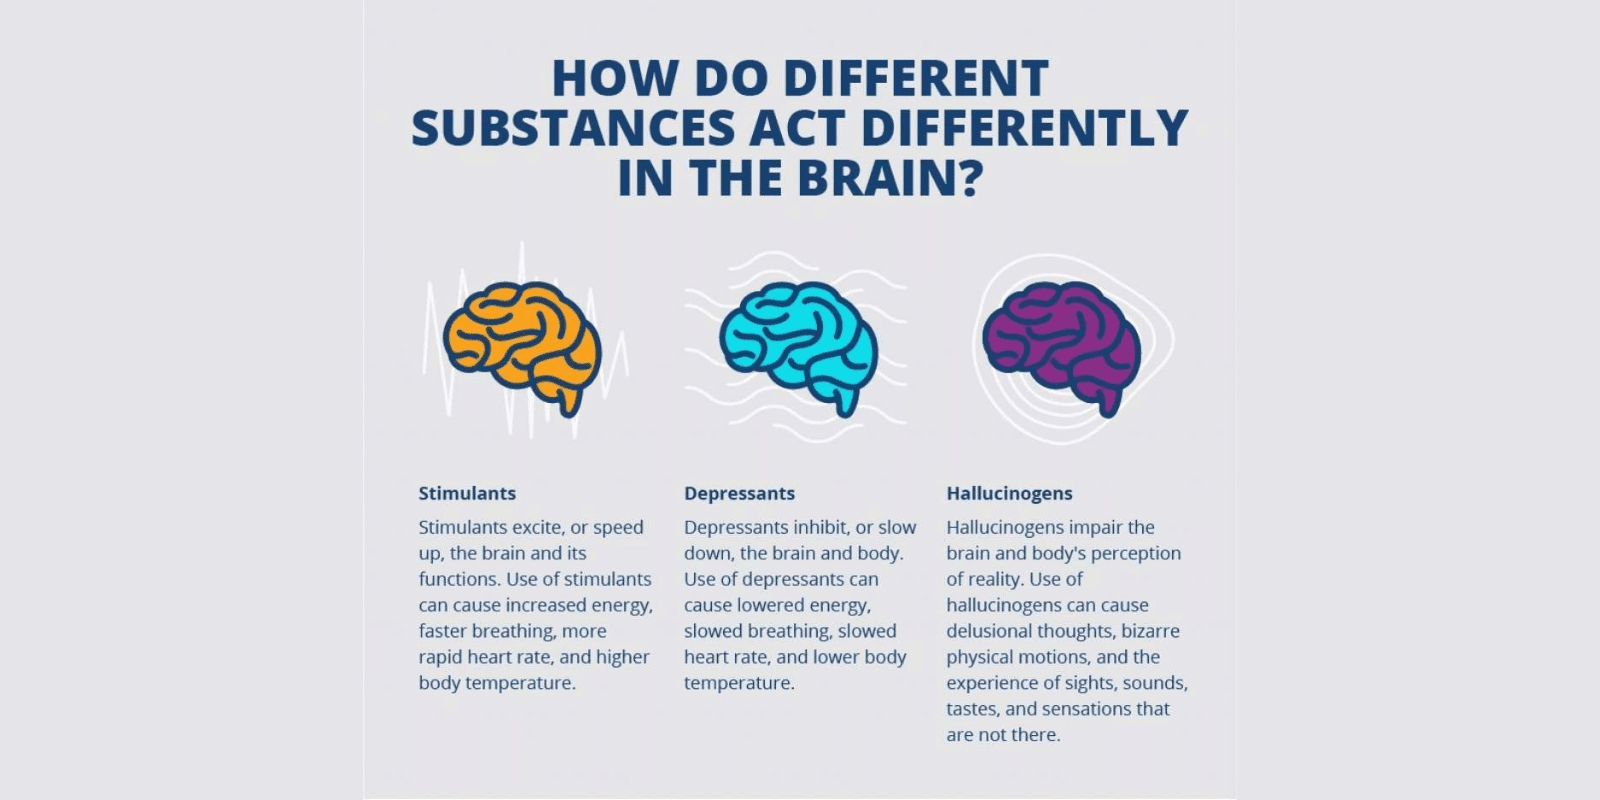 How different substances act differently in the brain laid out in a visually appealing way